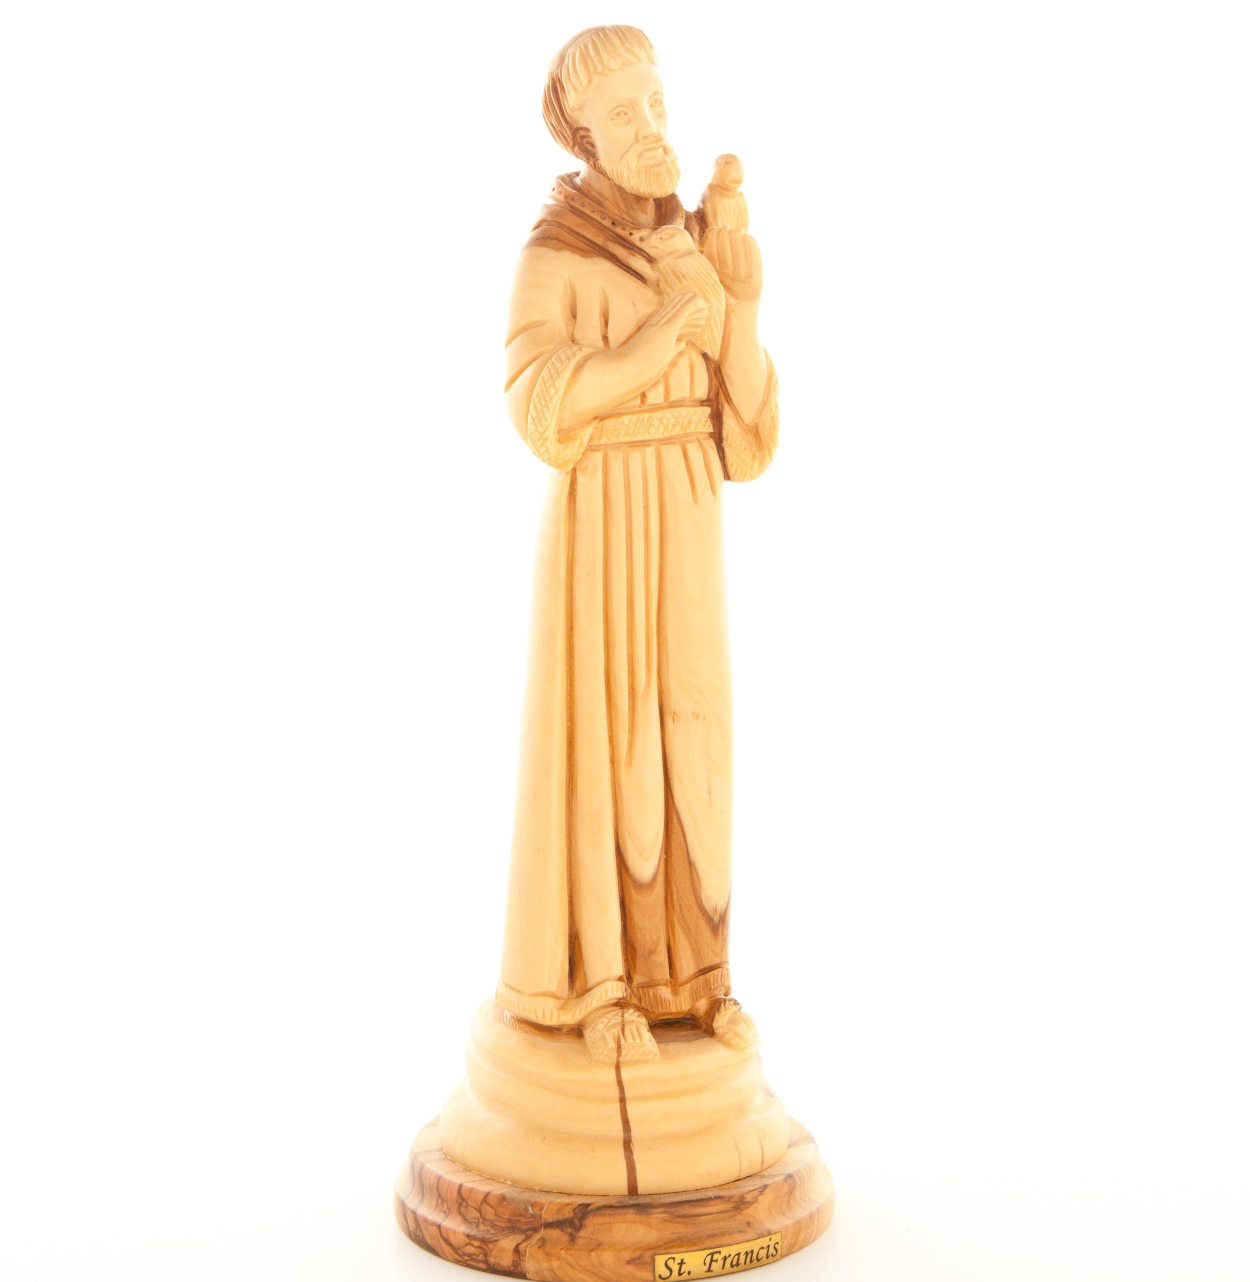 Saint Francis of Assisi Statue Figurine Love for Nature Hand Carved Olive Wood from the Holy Land